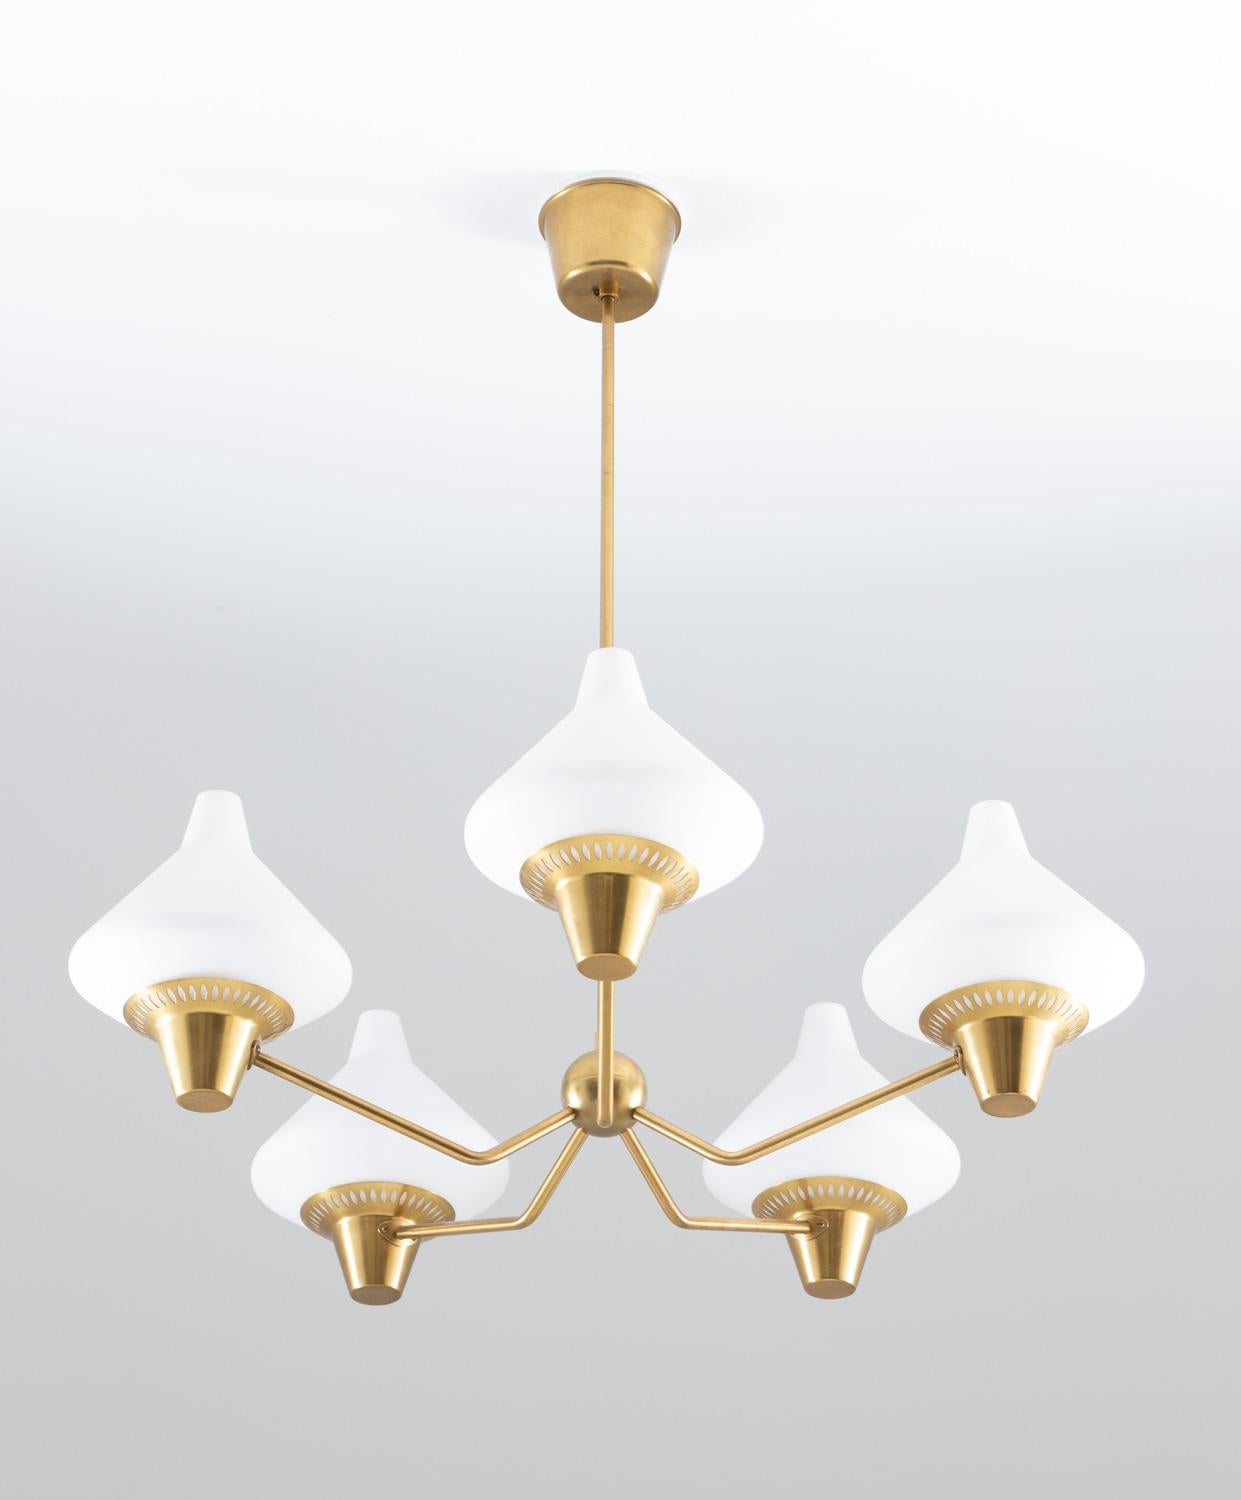 Chandelier in brass with shades of frosted opaline glass ASEA, Sweden, 1950s.
This small chandelier was made with an impressive sense for quality and design. Great details are the brass globe in the middle, and the perforated shade holders that